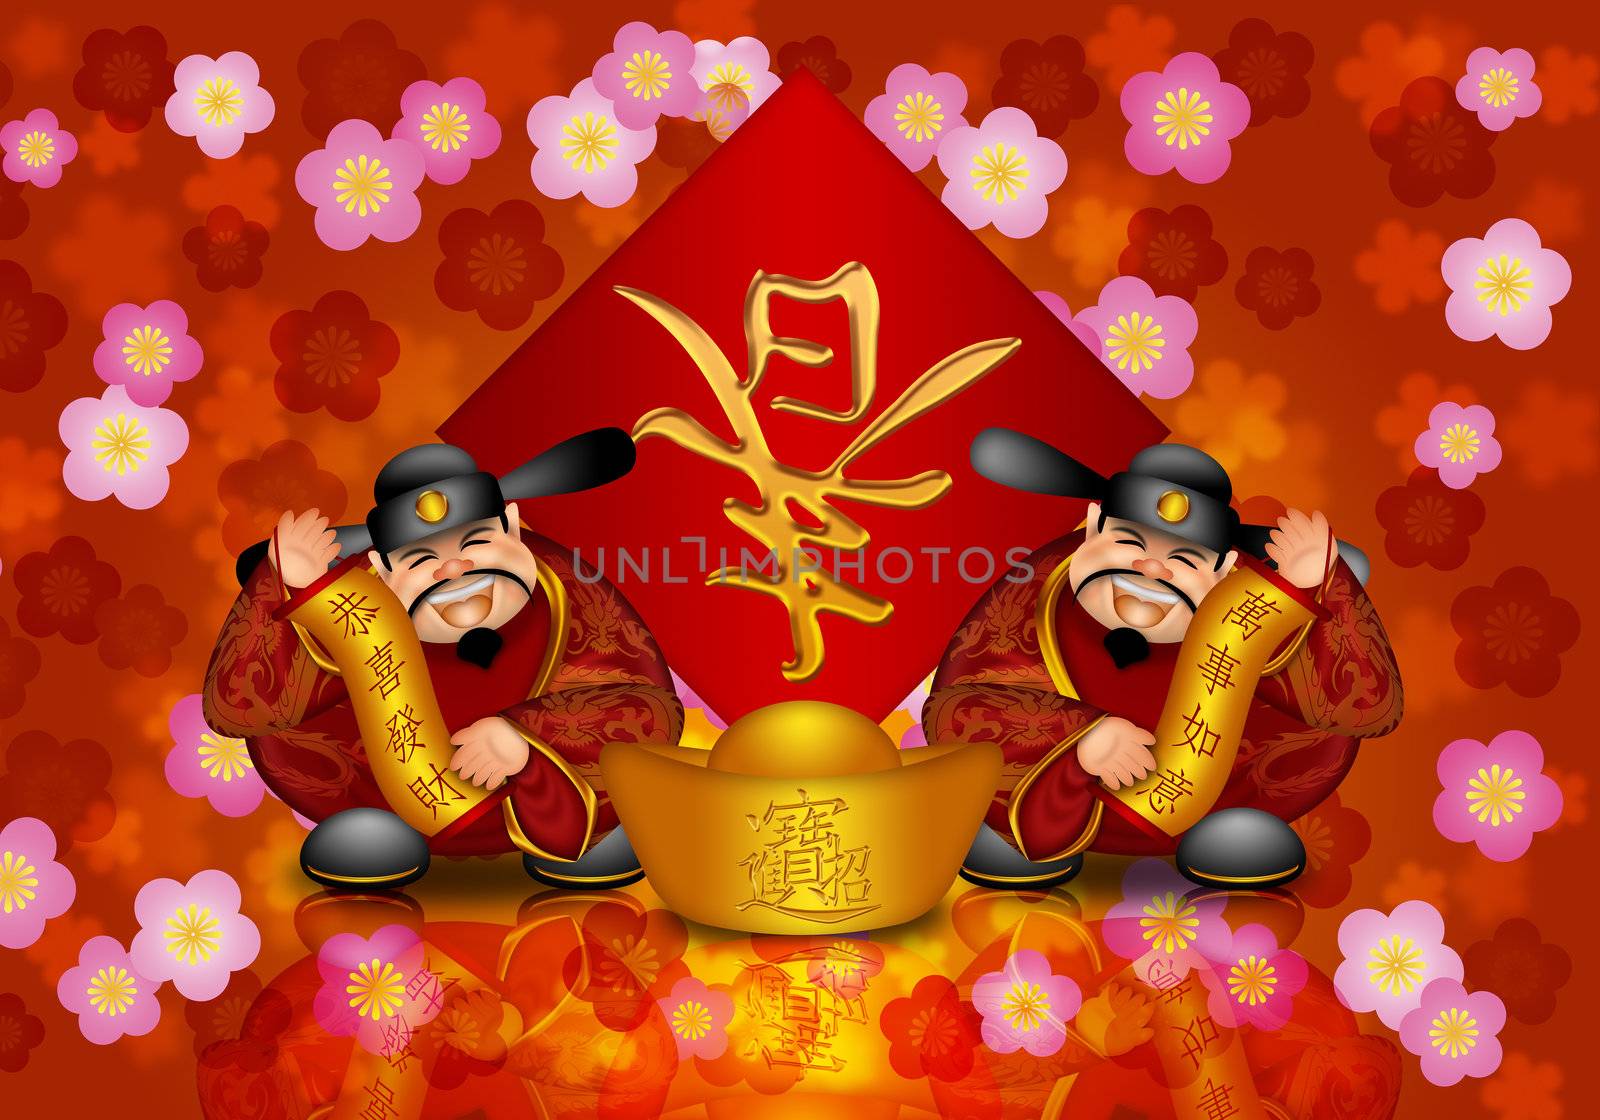 Pair Chinese Prosperity Money God Holding Scrolls with Text Wishing Happiness Wealth and Wishes Come True And Sign with Arrival of Spring Word